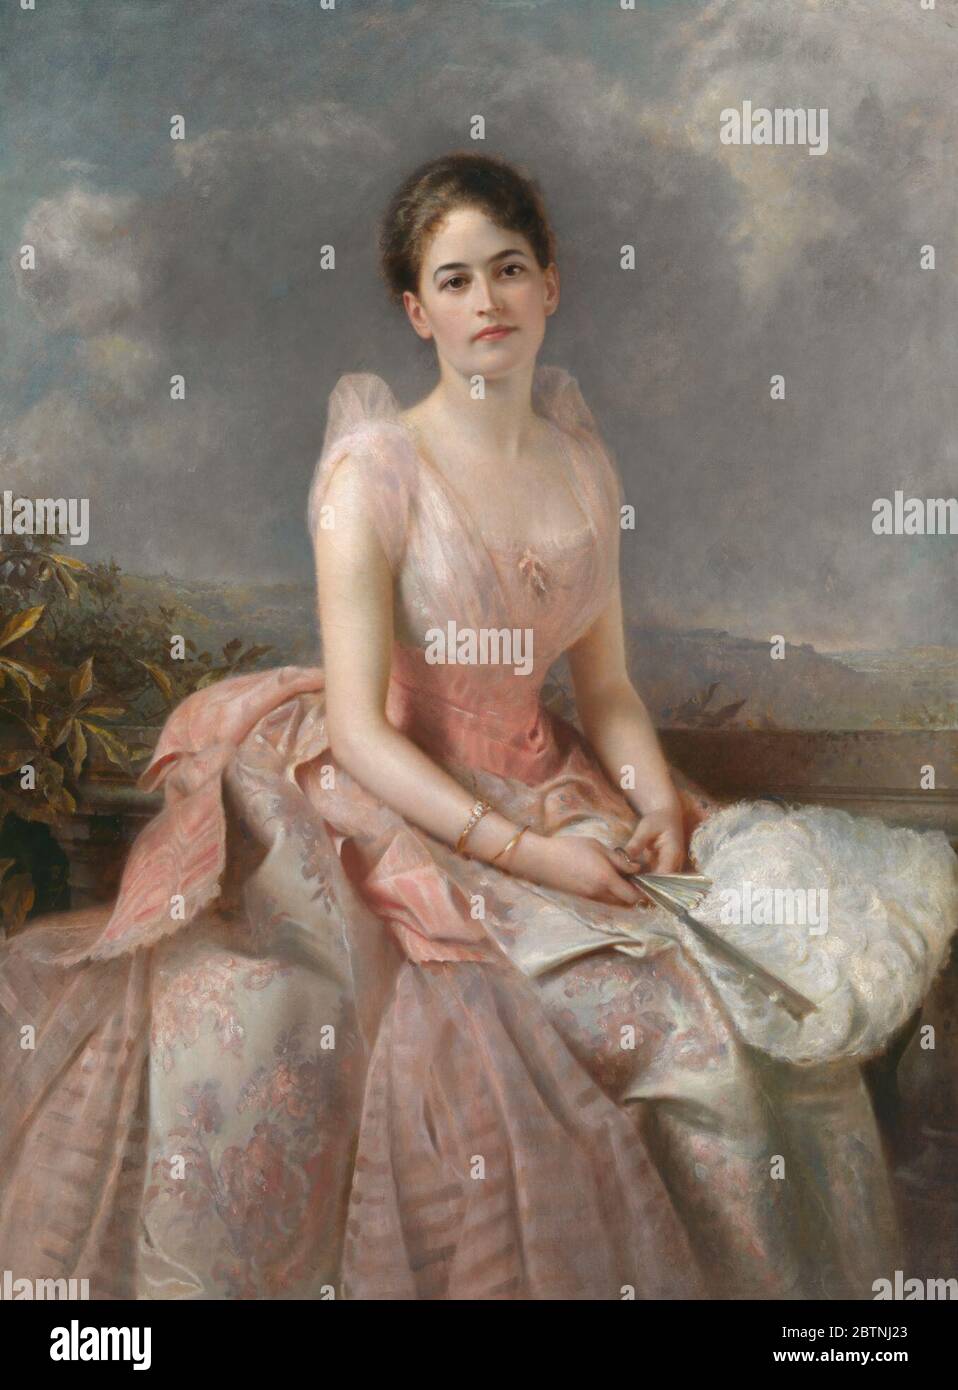 Juliette Gordon Low. Born Savannah, GeorgiaElegantly depicted by British artist Edward Hughes, Juliette Gordon Low radiates the luxury of elite American birth and marriage to a wealthy Englishman. Low’s satisfaction with her privileged lifestyle, however, soon faded. Stock Photo